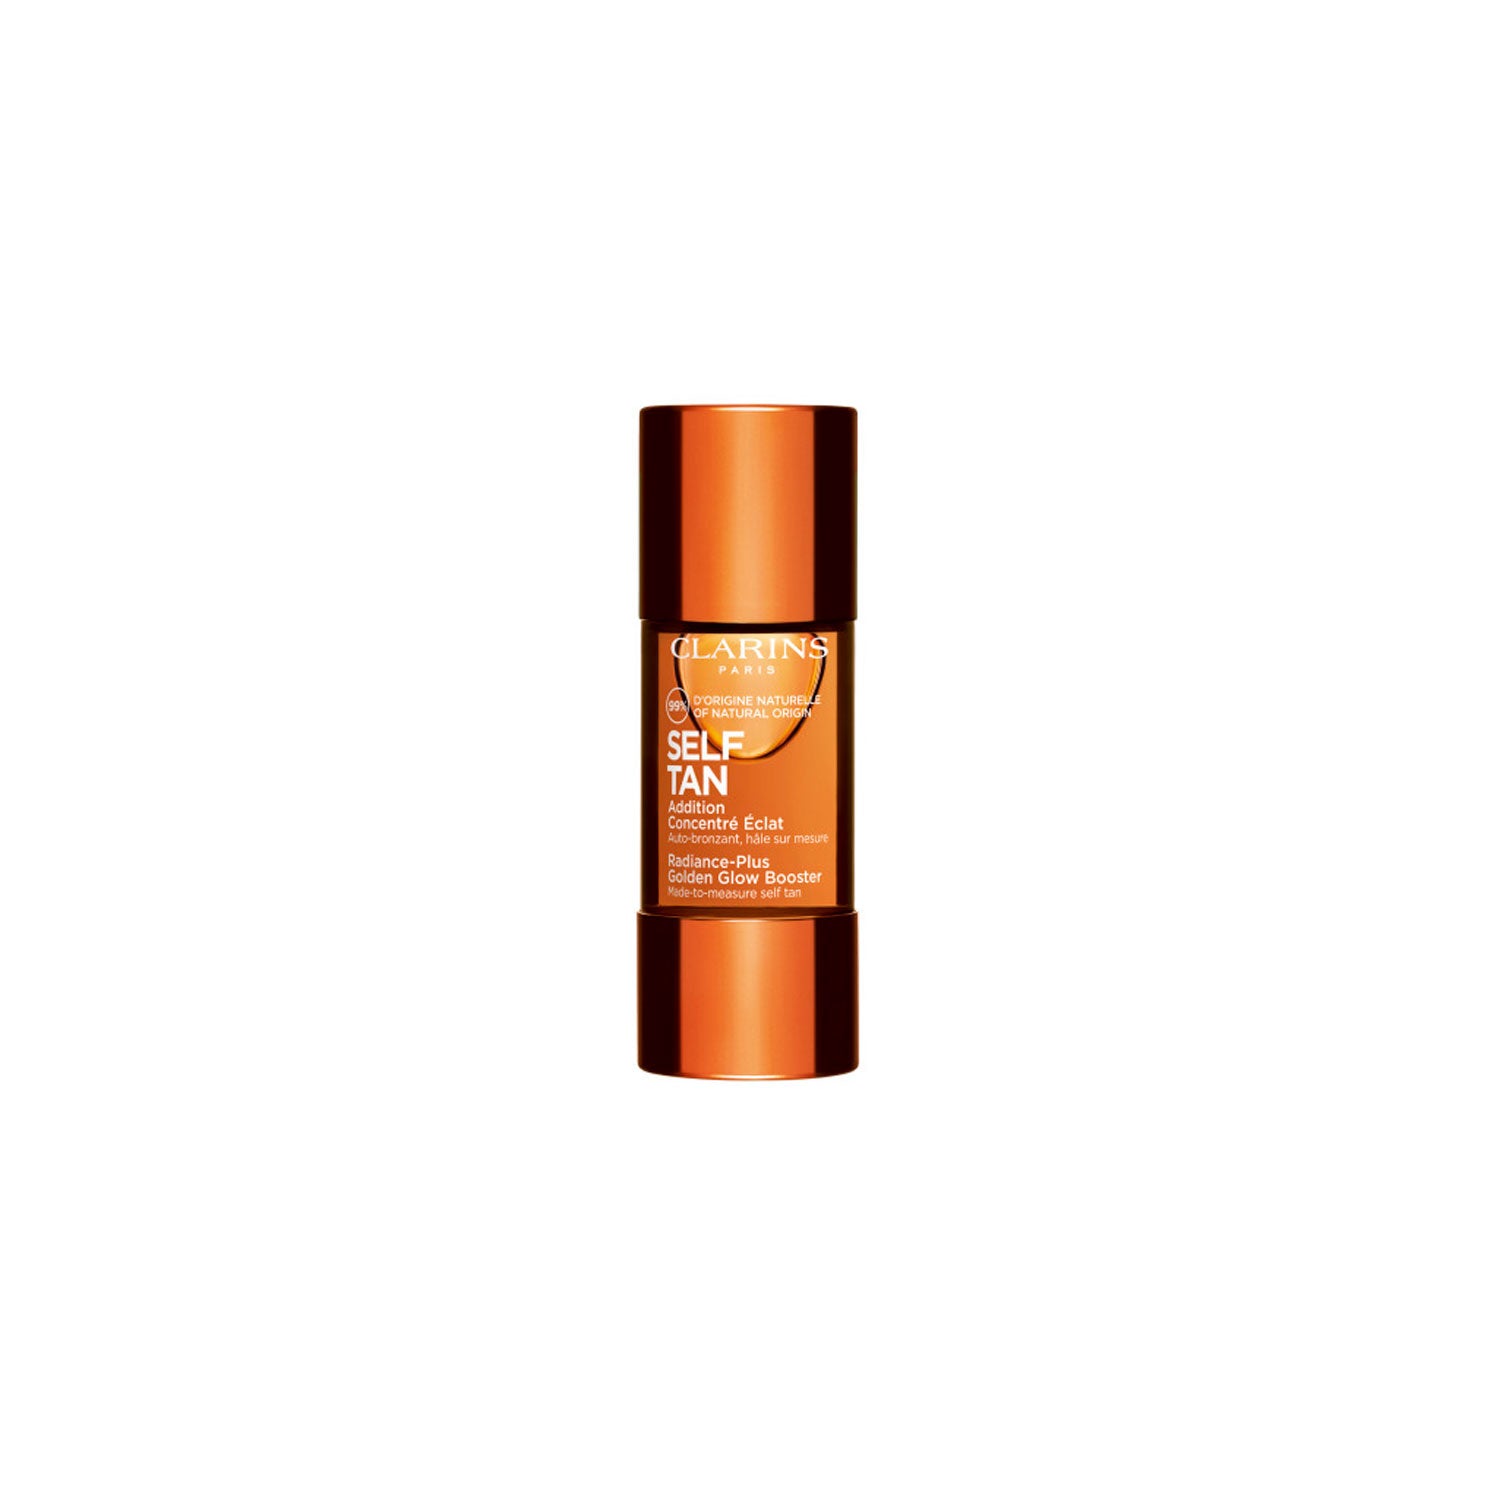 Clarins Self Tan Radiance-Plus Golden Glow Booster Face 15ml 1 Shaws Department Stores